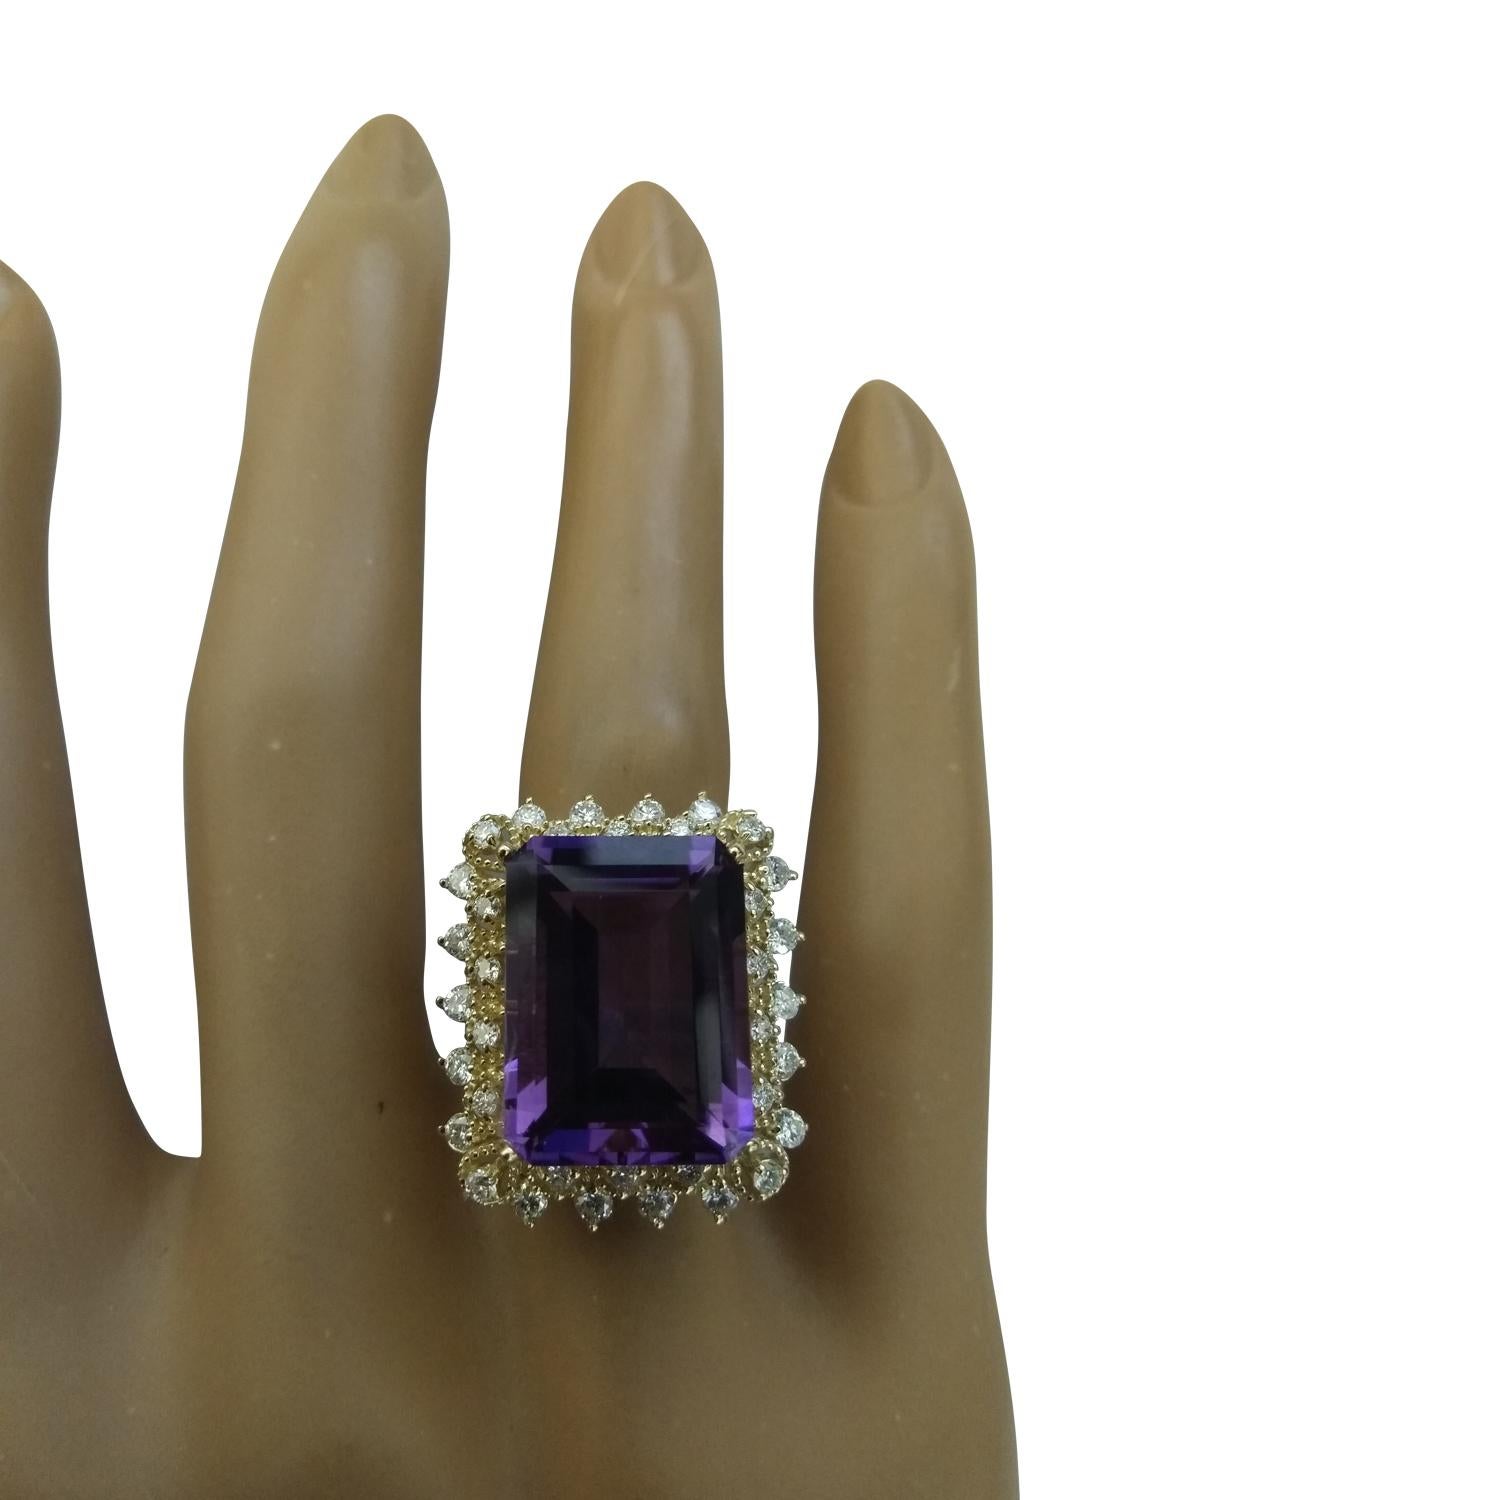 11.95 Carat Natural Amethyst 14 Karat Solid Yellow Gold Diamond Ring
Stamped: 14K 
Total Ring Weight: 6 Grams 
Amethyst Weight 11.15 Carat (16.00x12.00 Millimeters)
Diamond Weight: 0.80 carat (F-G Color, VS2-SI1 Clarity )
Quantity: 36
Face Measures: